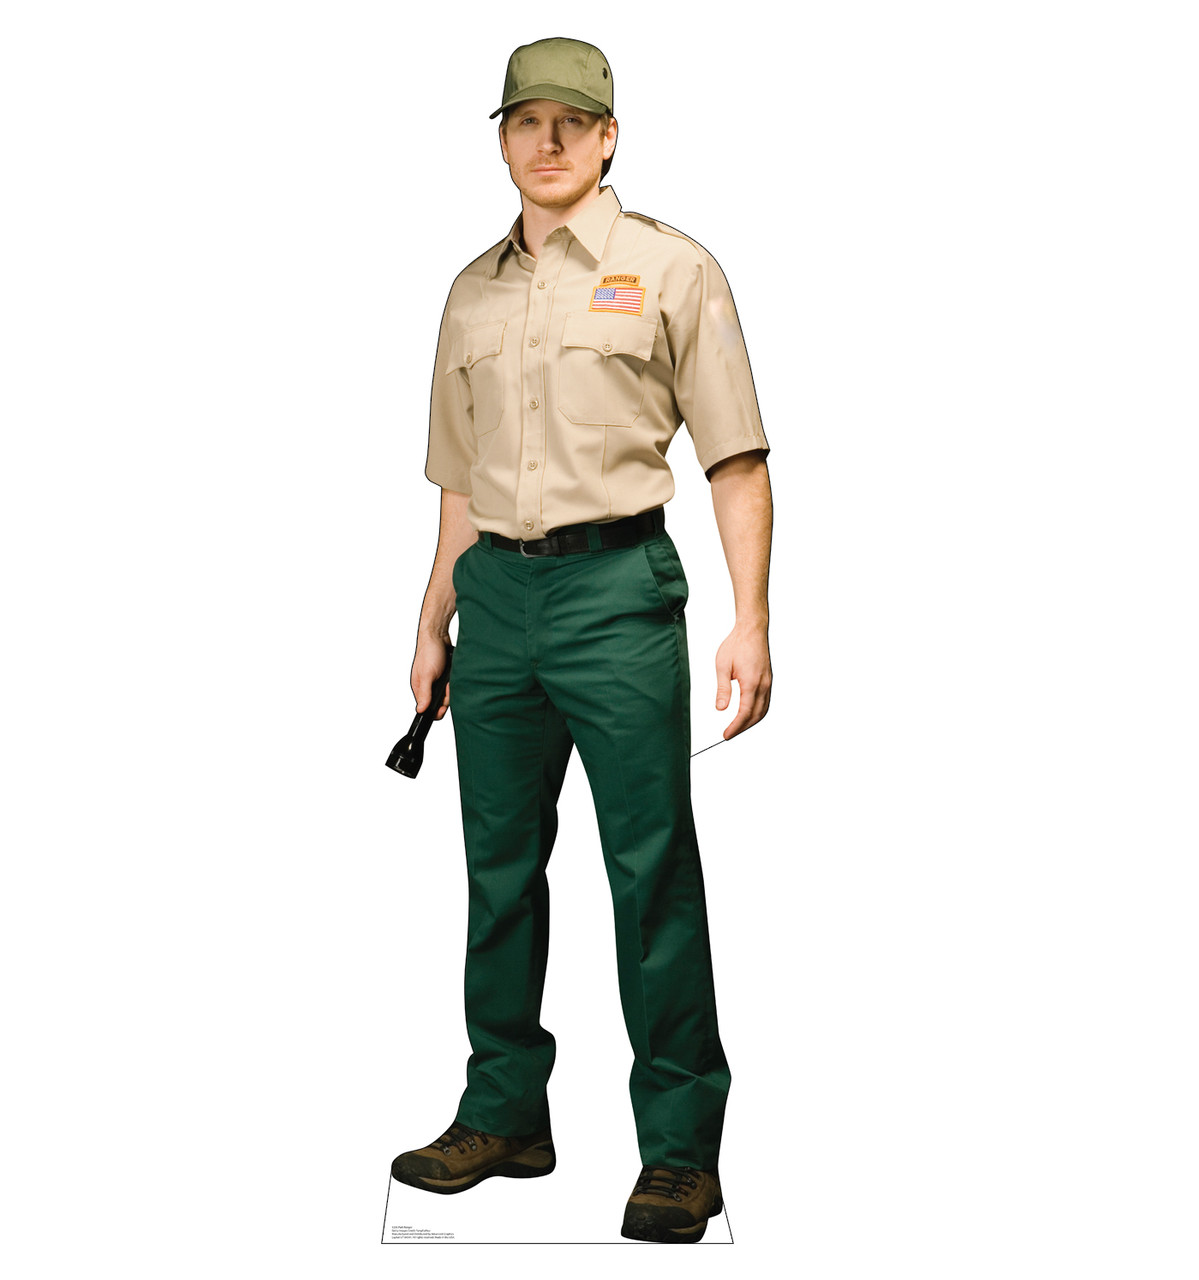 Life-size cardboard standee of a Park Ranger.